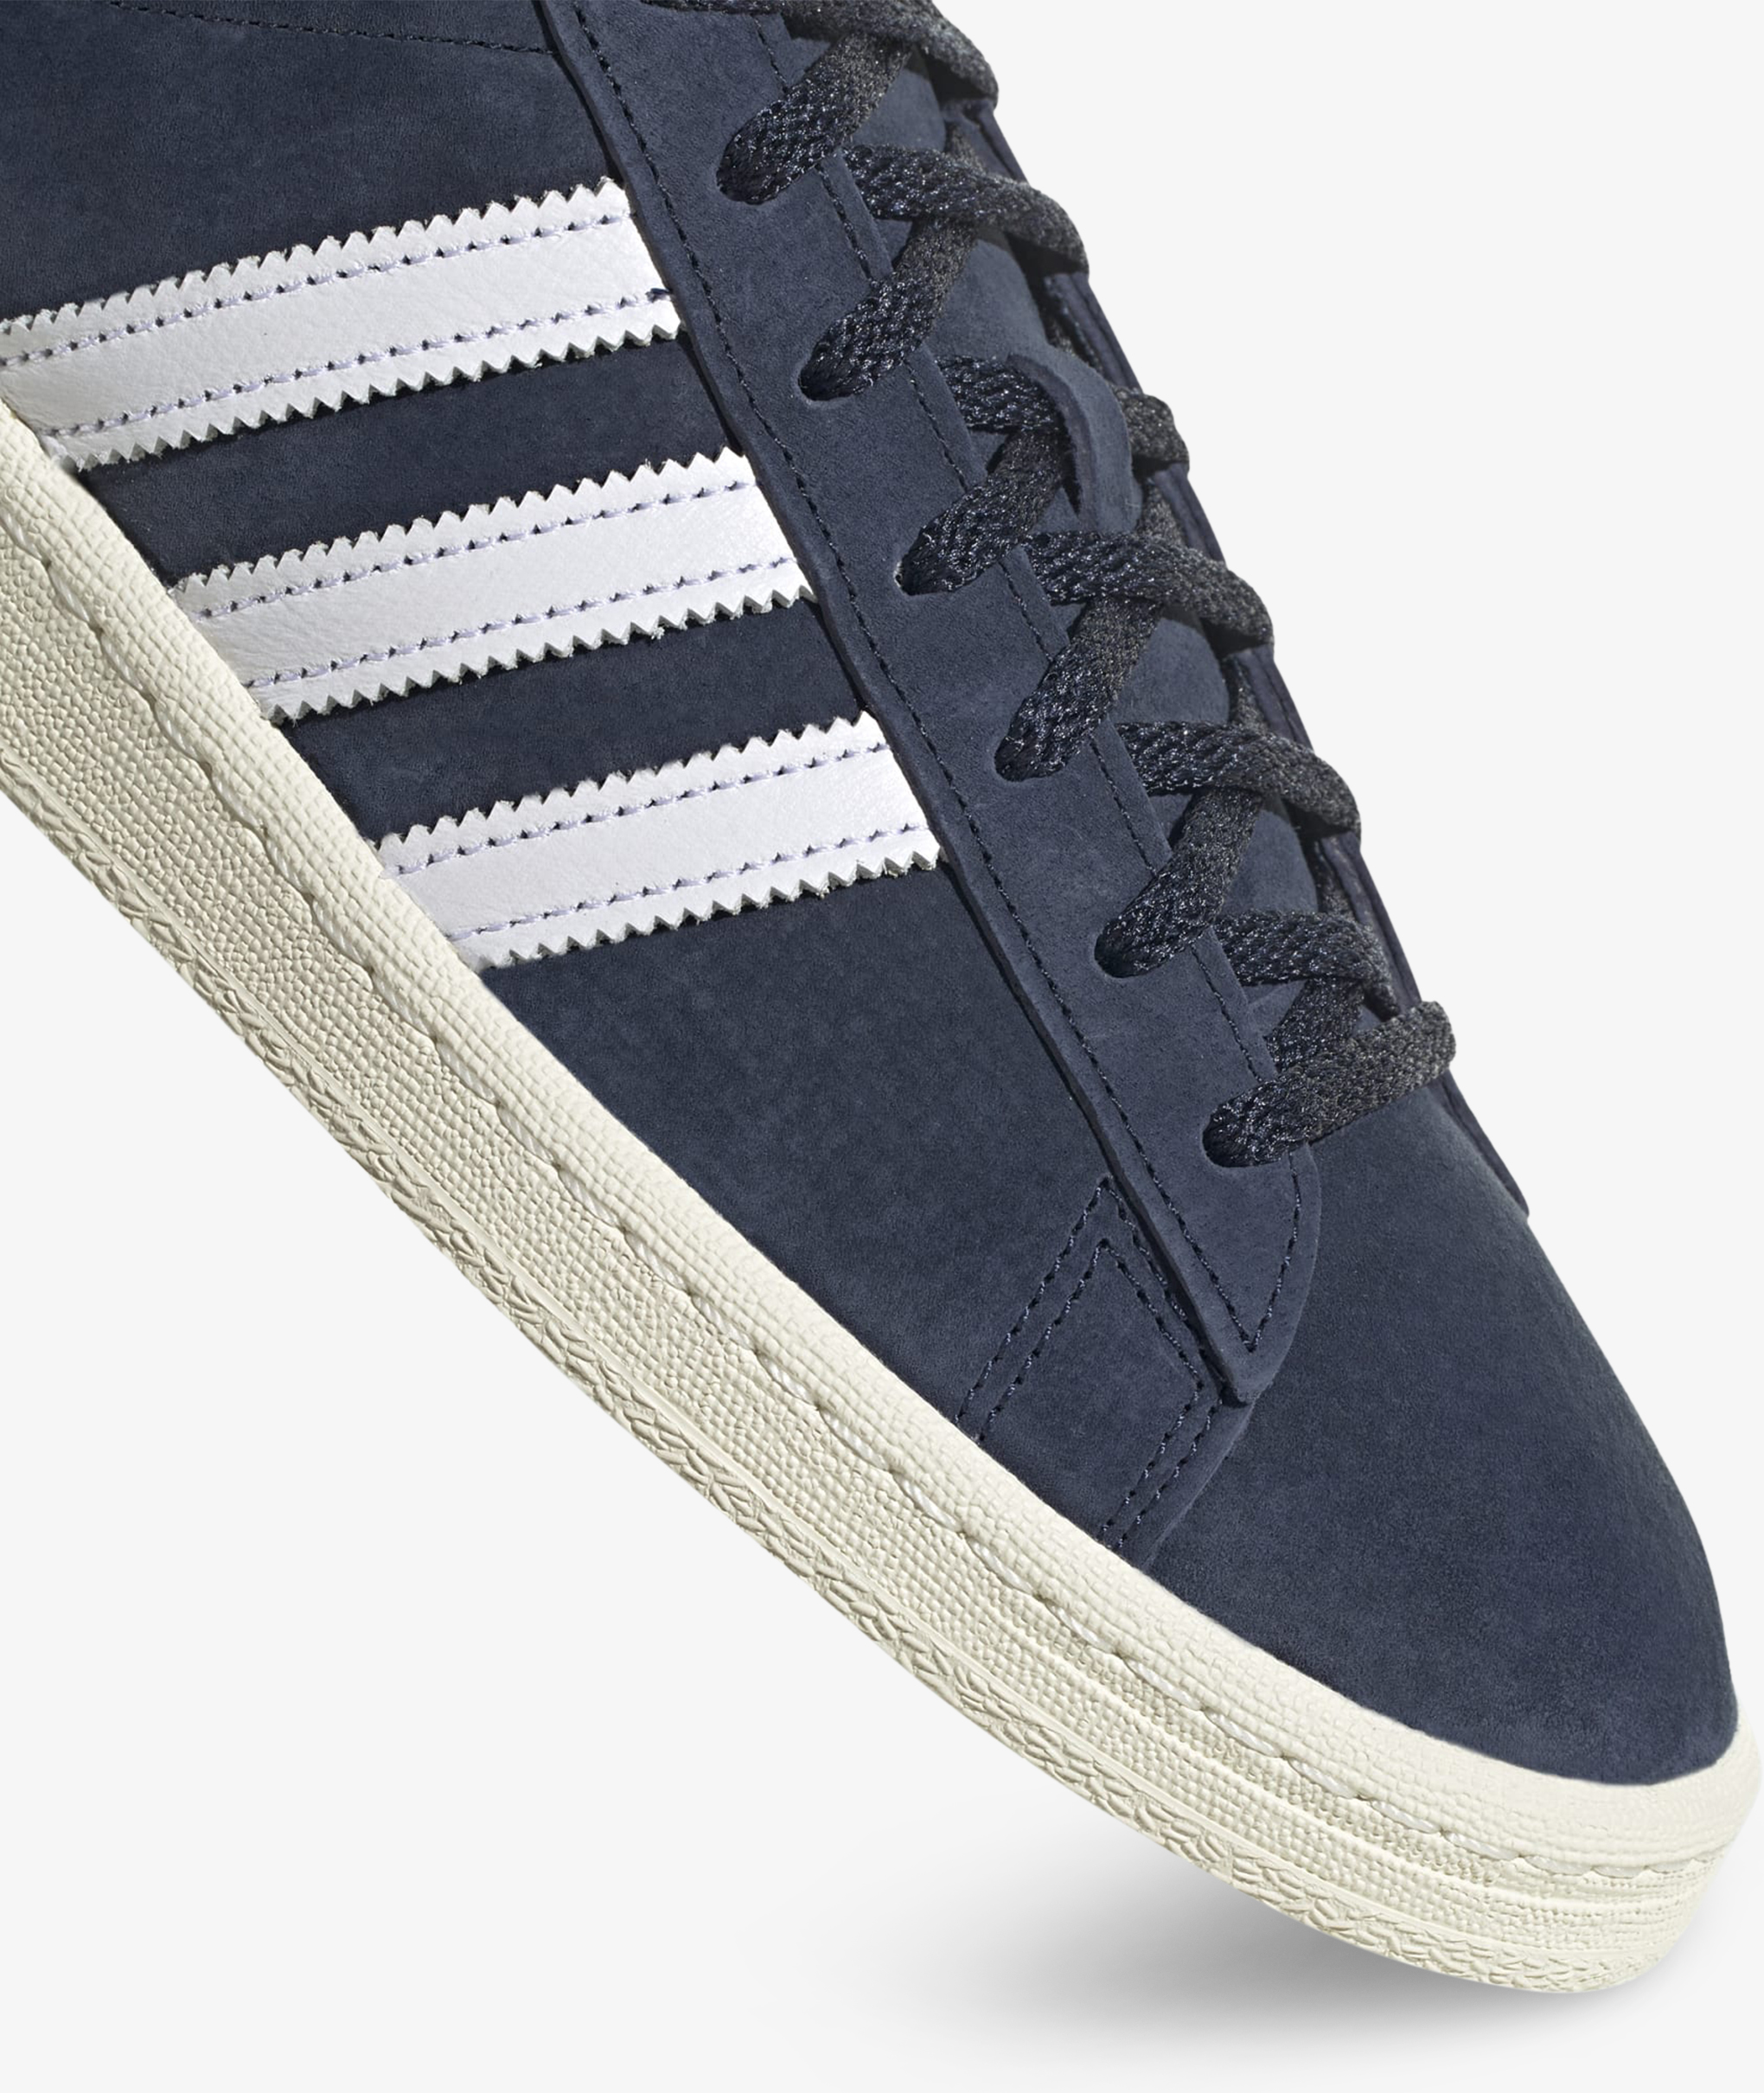 Norse Store | Shipping Worldwide - adidas Originals CAMPUS 80s